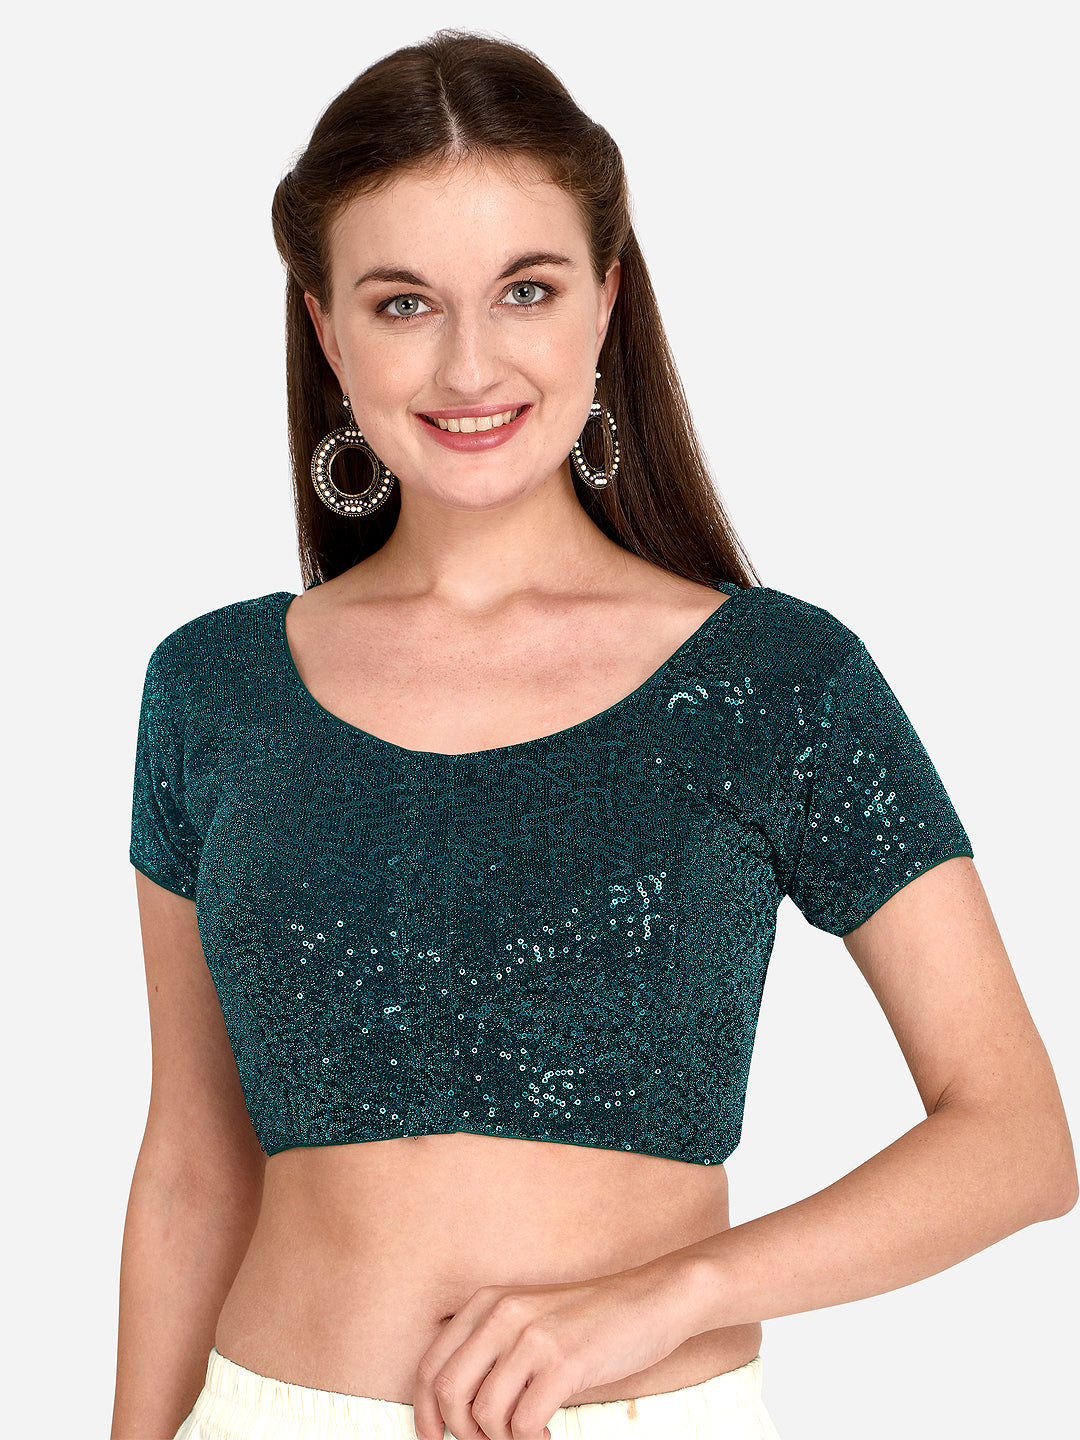 Women's Fancy Net Blouse With Round Neck And Stylish Design